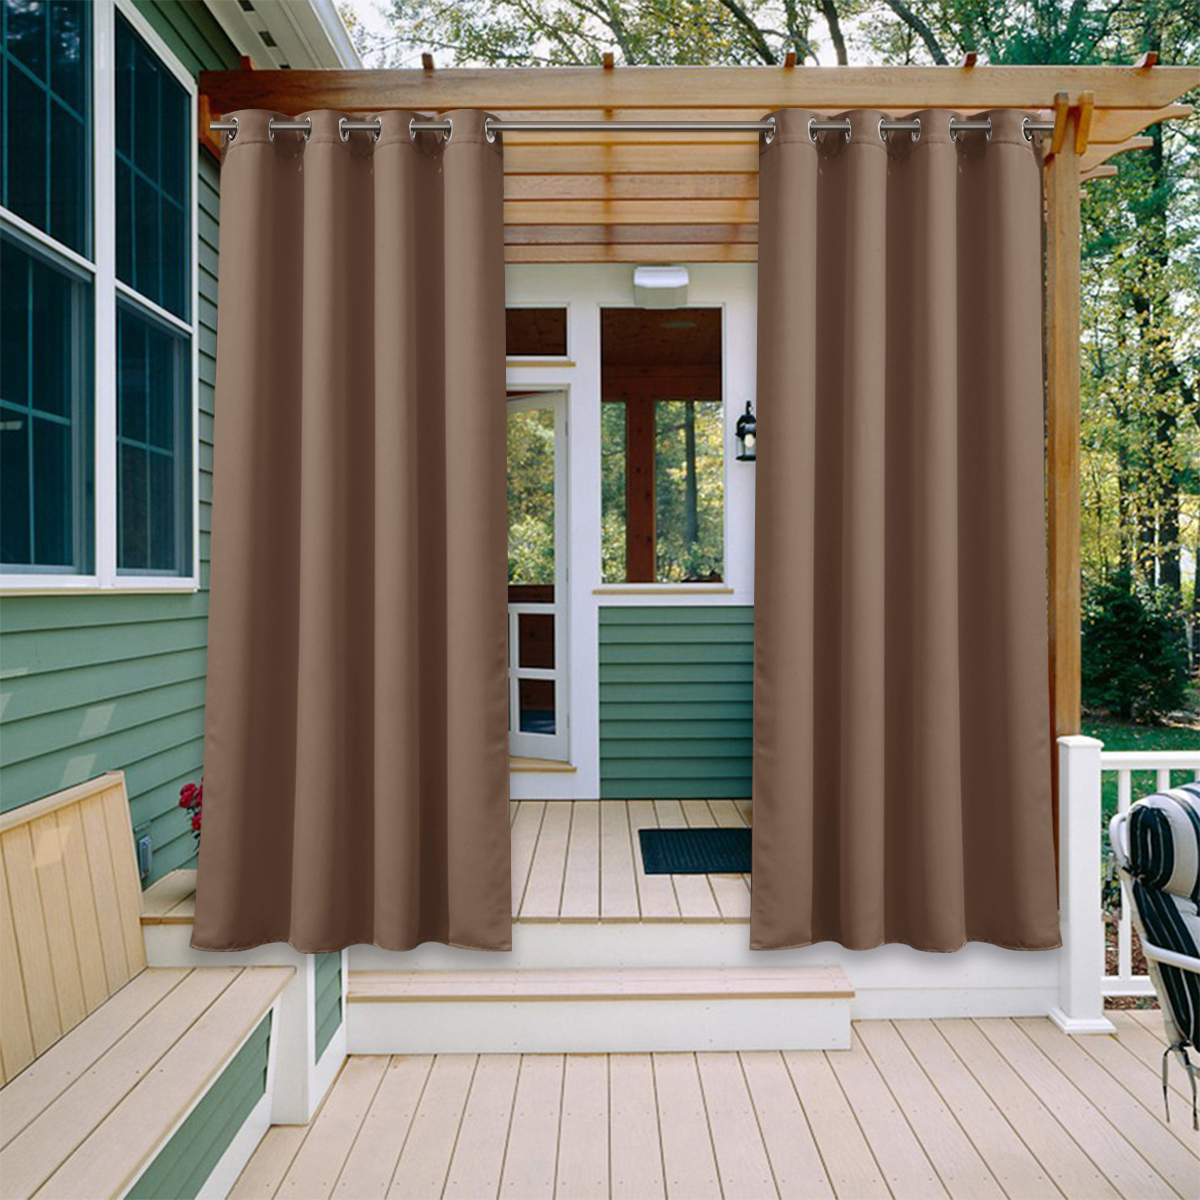 Blackout Waterproof Outdoor Curtain For Patio/front Porch ,sold As 1 Panel